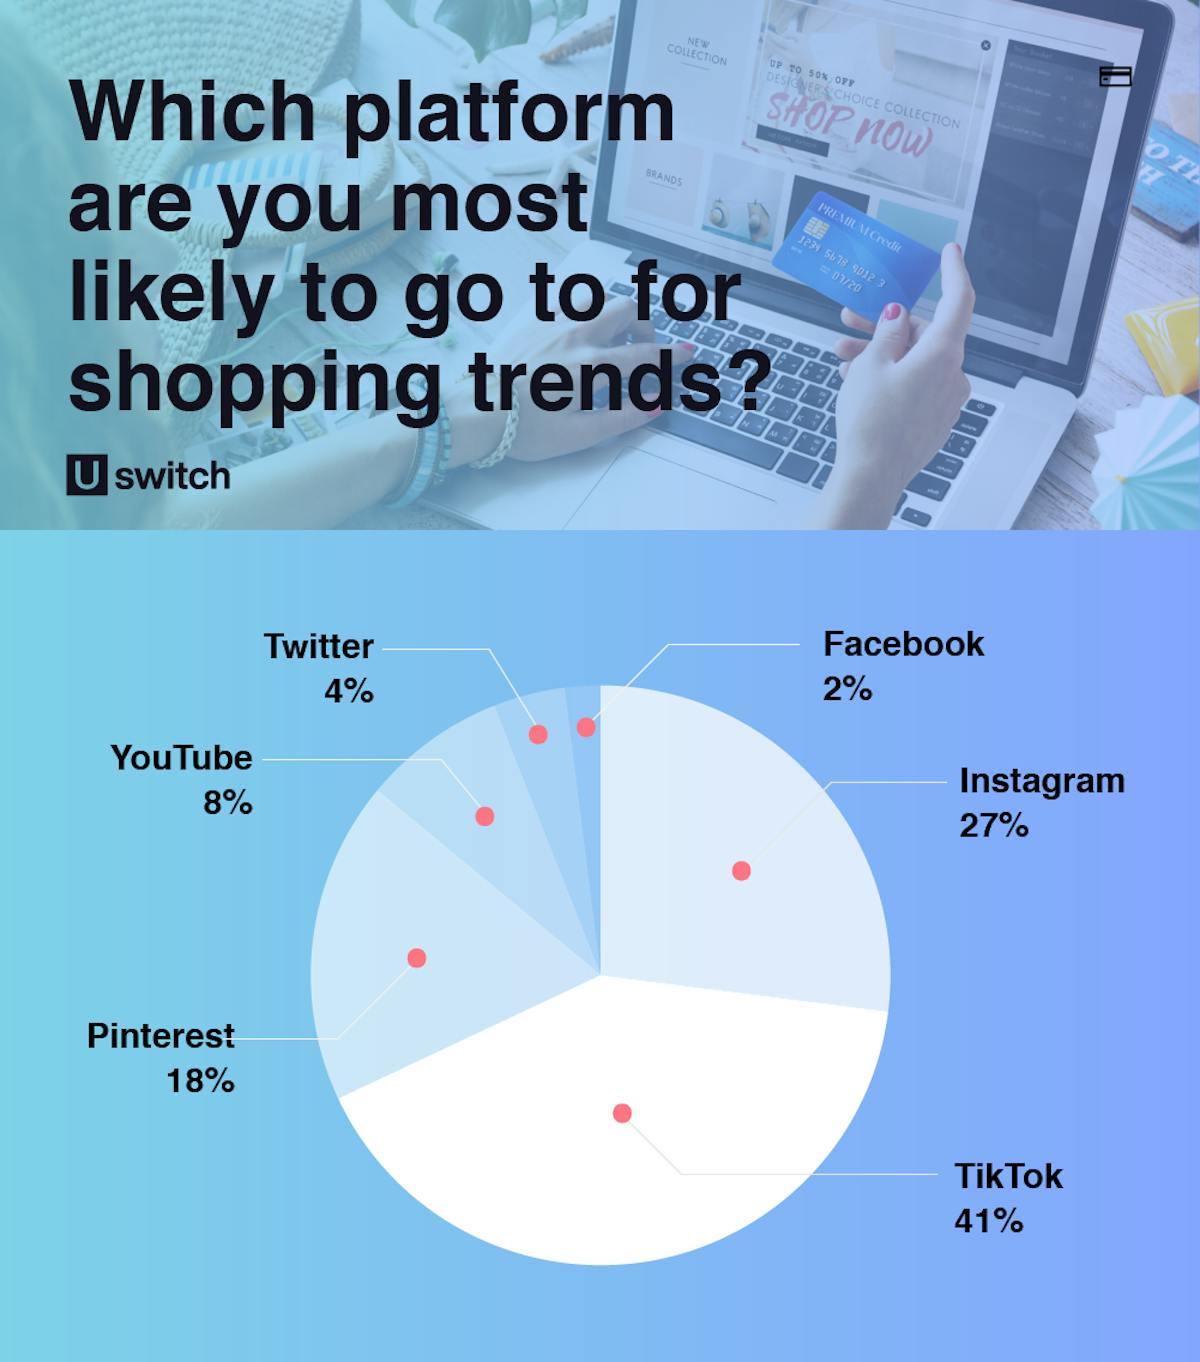 Which platform are you most likely to go to for shopping trends poll